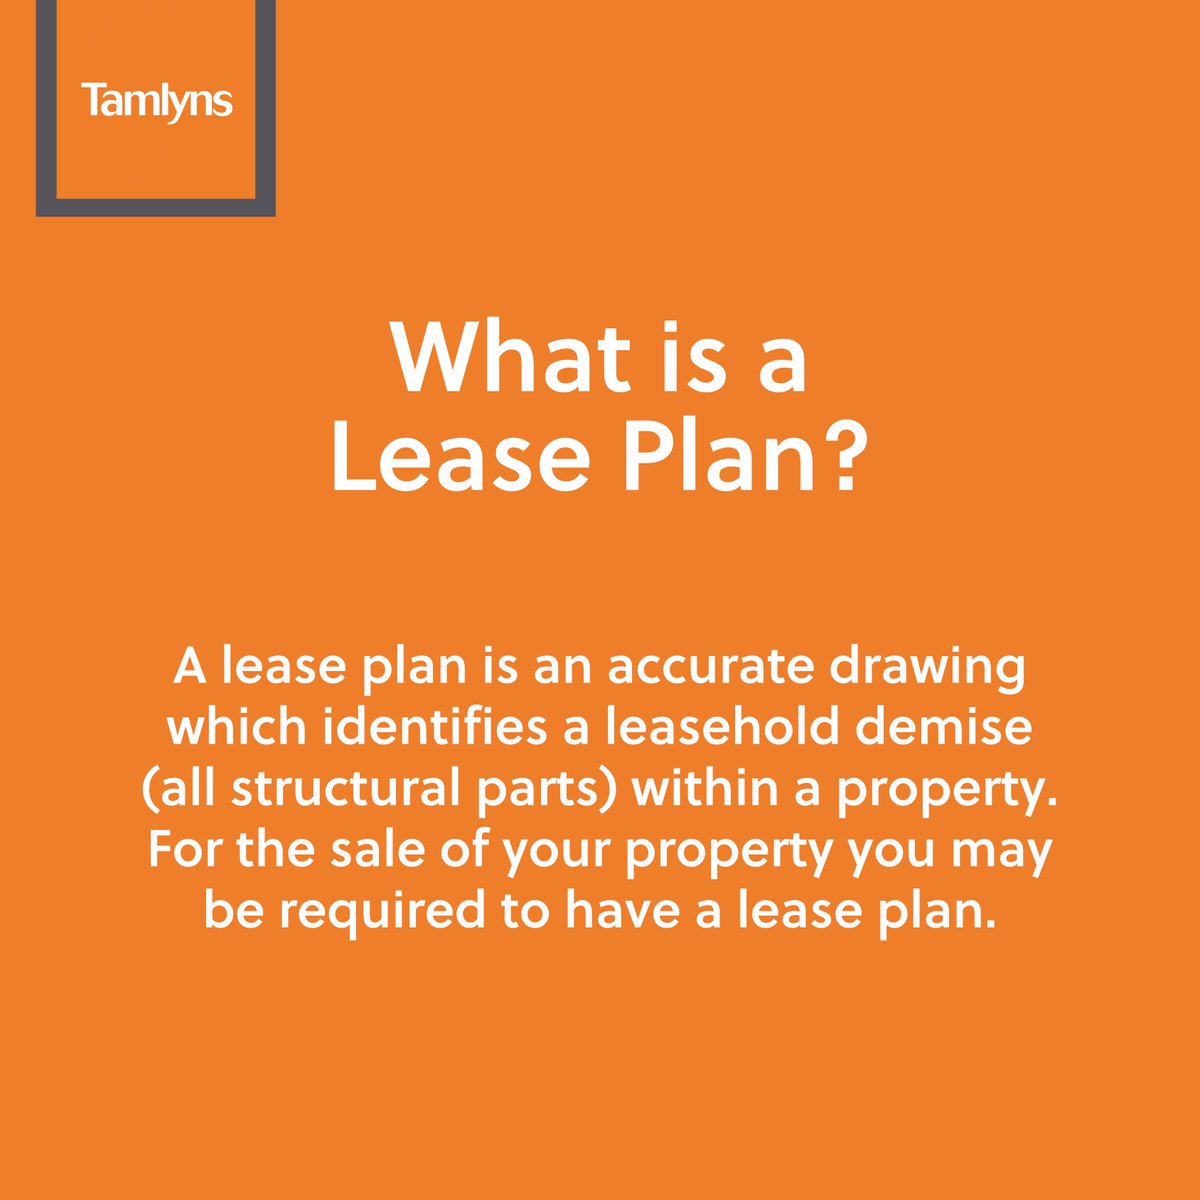 A #leaseplan is an accurate drawing which identifies a leasehold demise (all structural parts) within a property. For the sale of your property you may be required to have a lease plan. Consider using Tamlyns to conduct your property lease plan at tamlynsprofessional.co.uk